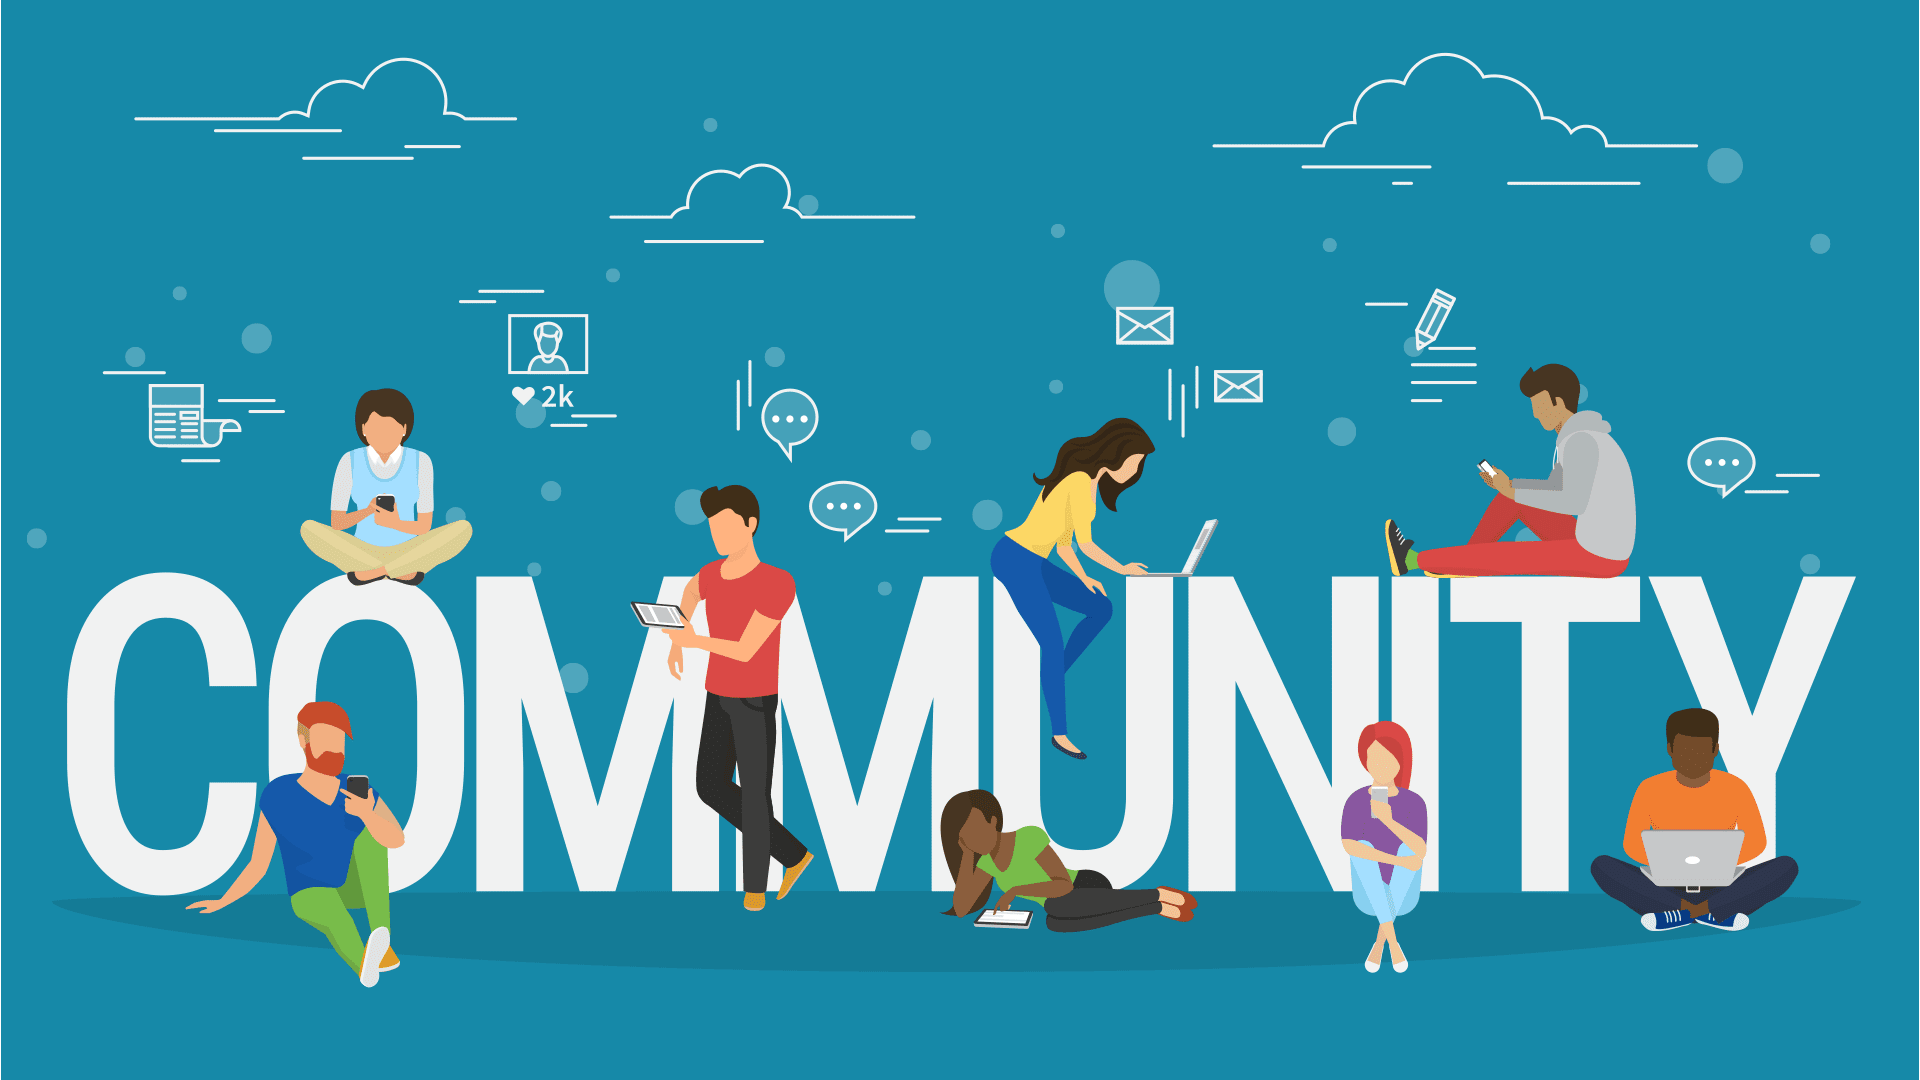 Create an online community for your clients